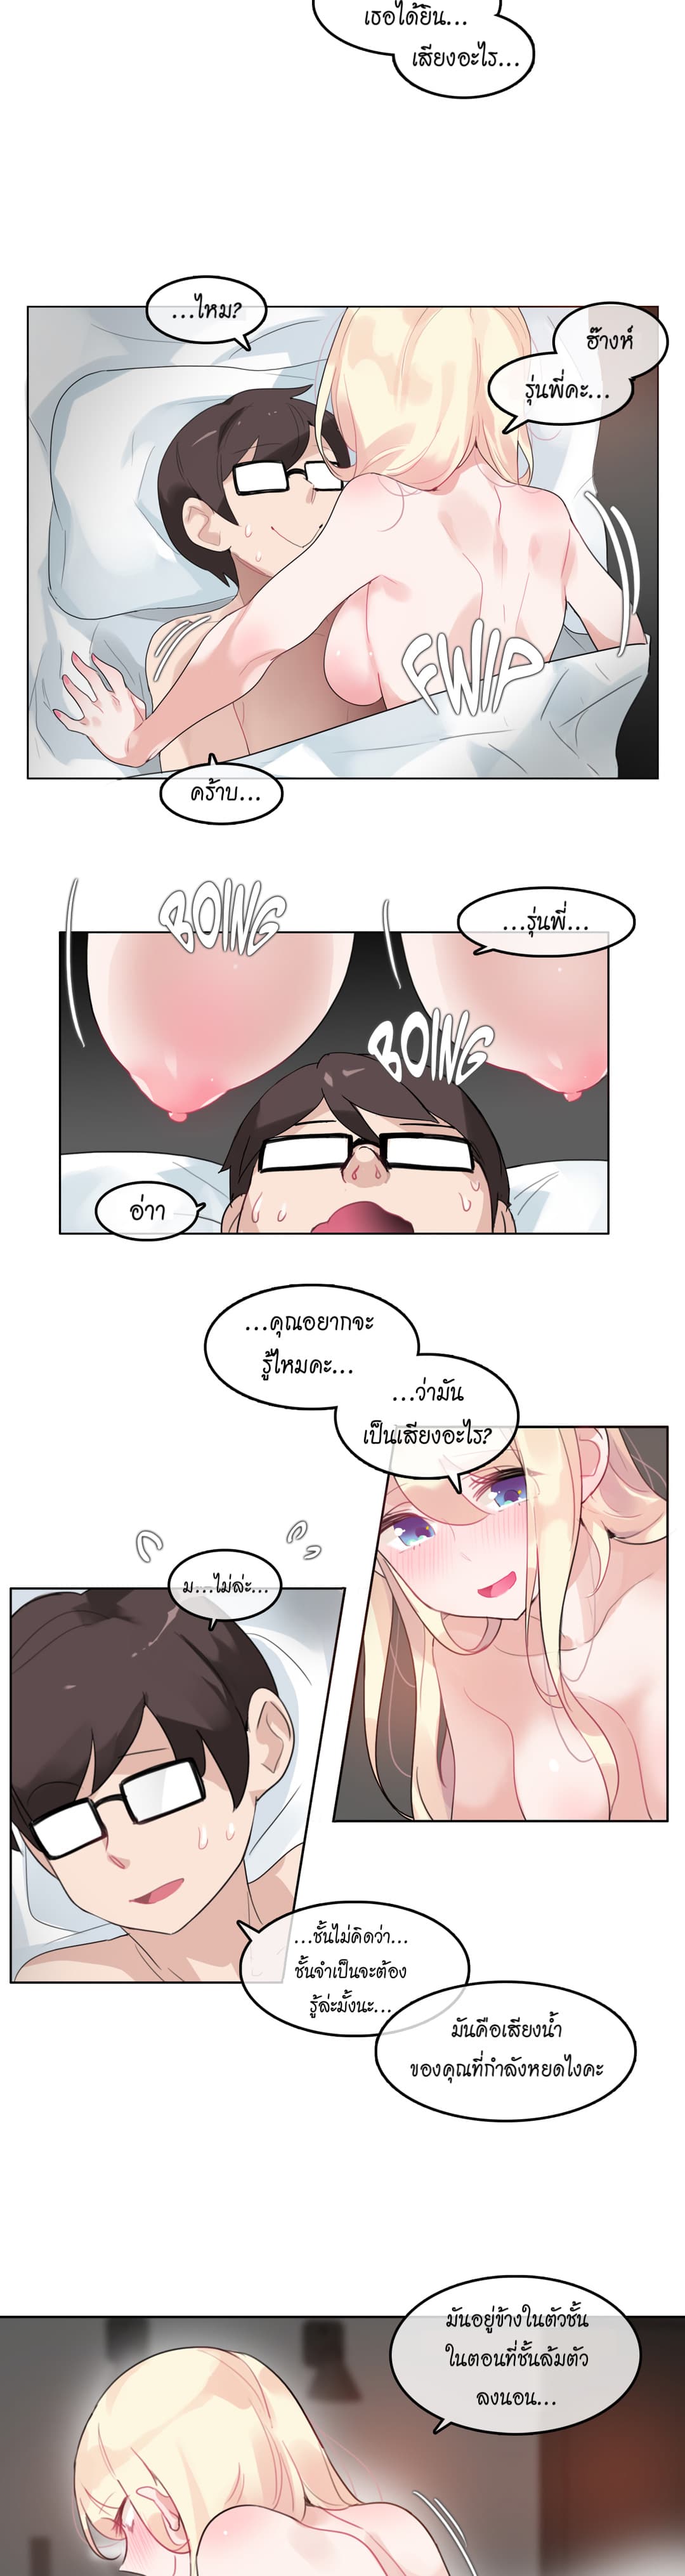 A Pervert’s Daily Life 44 (15)